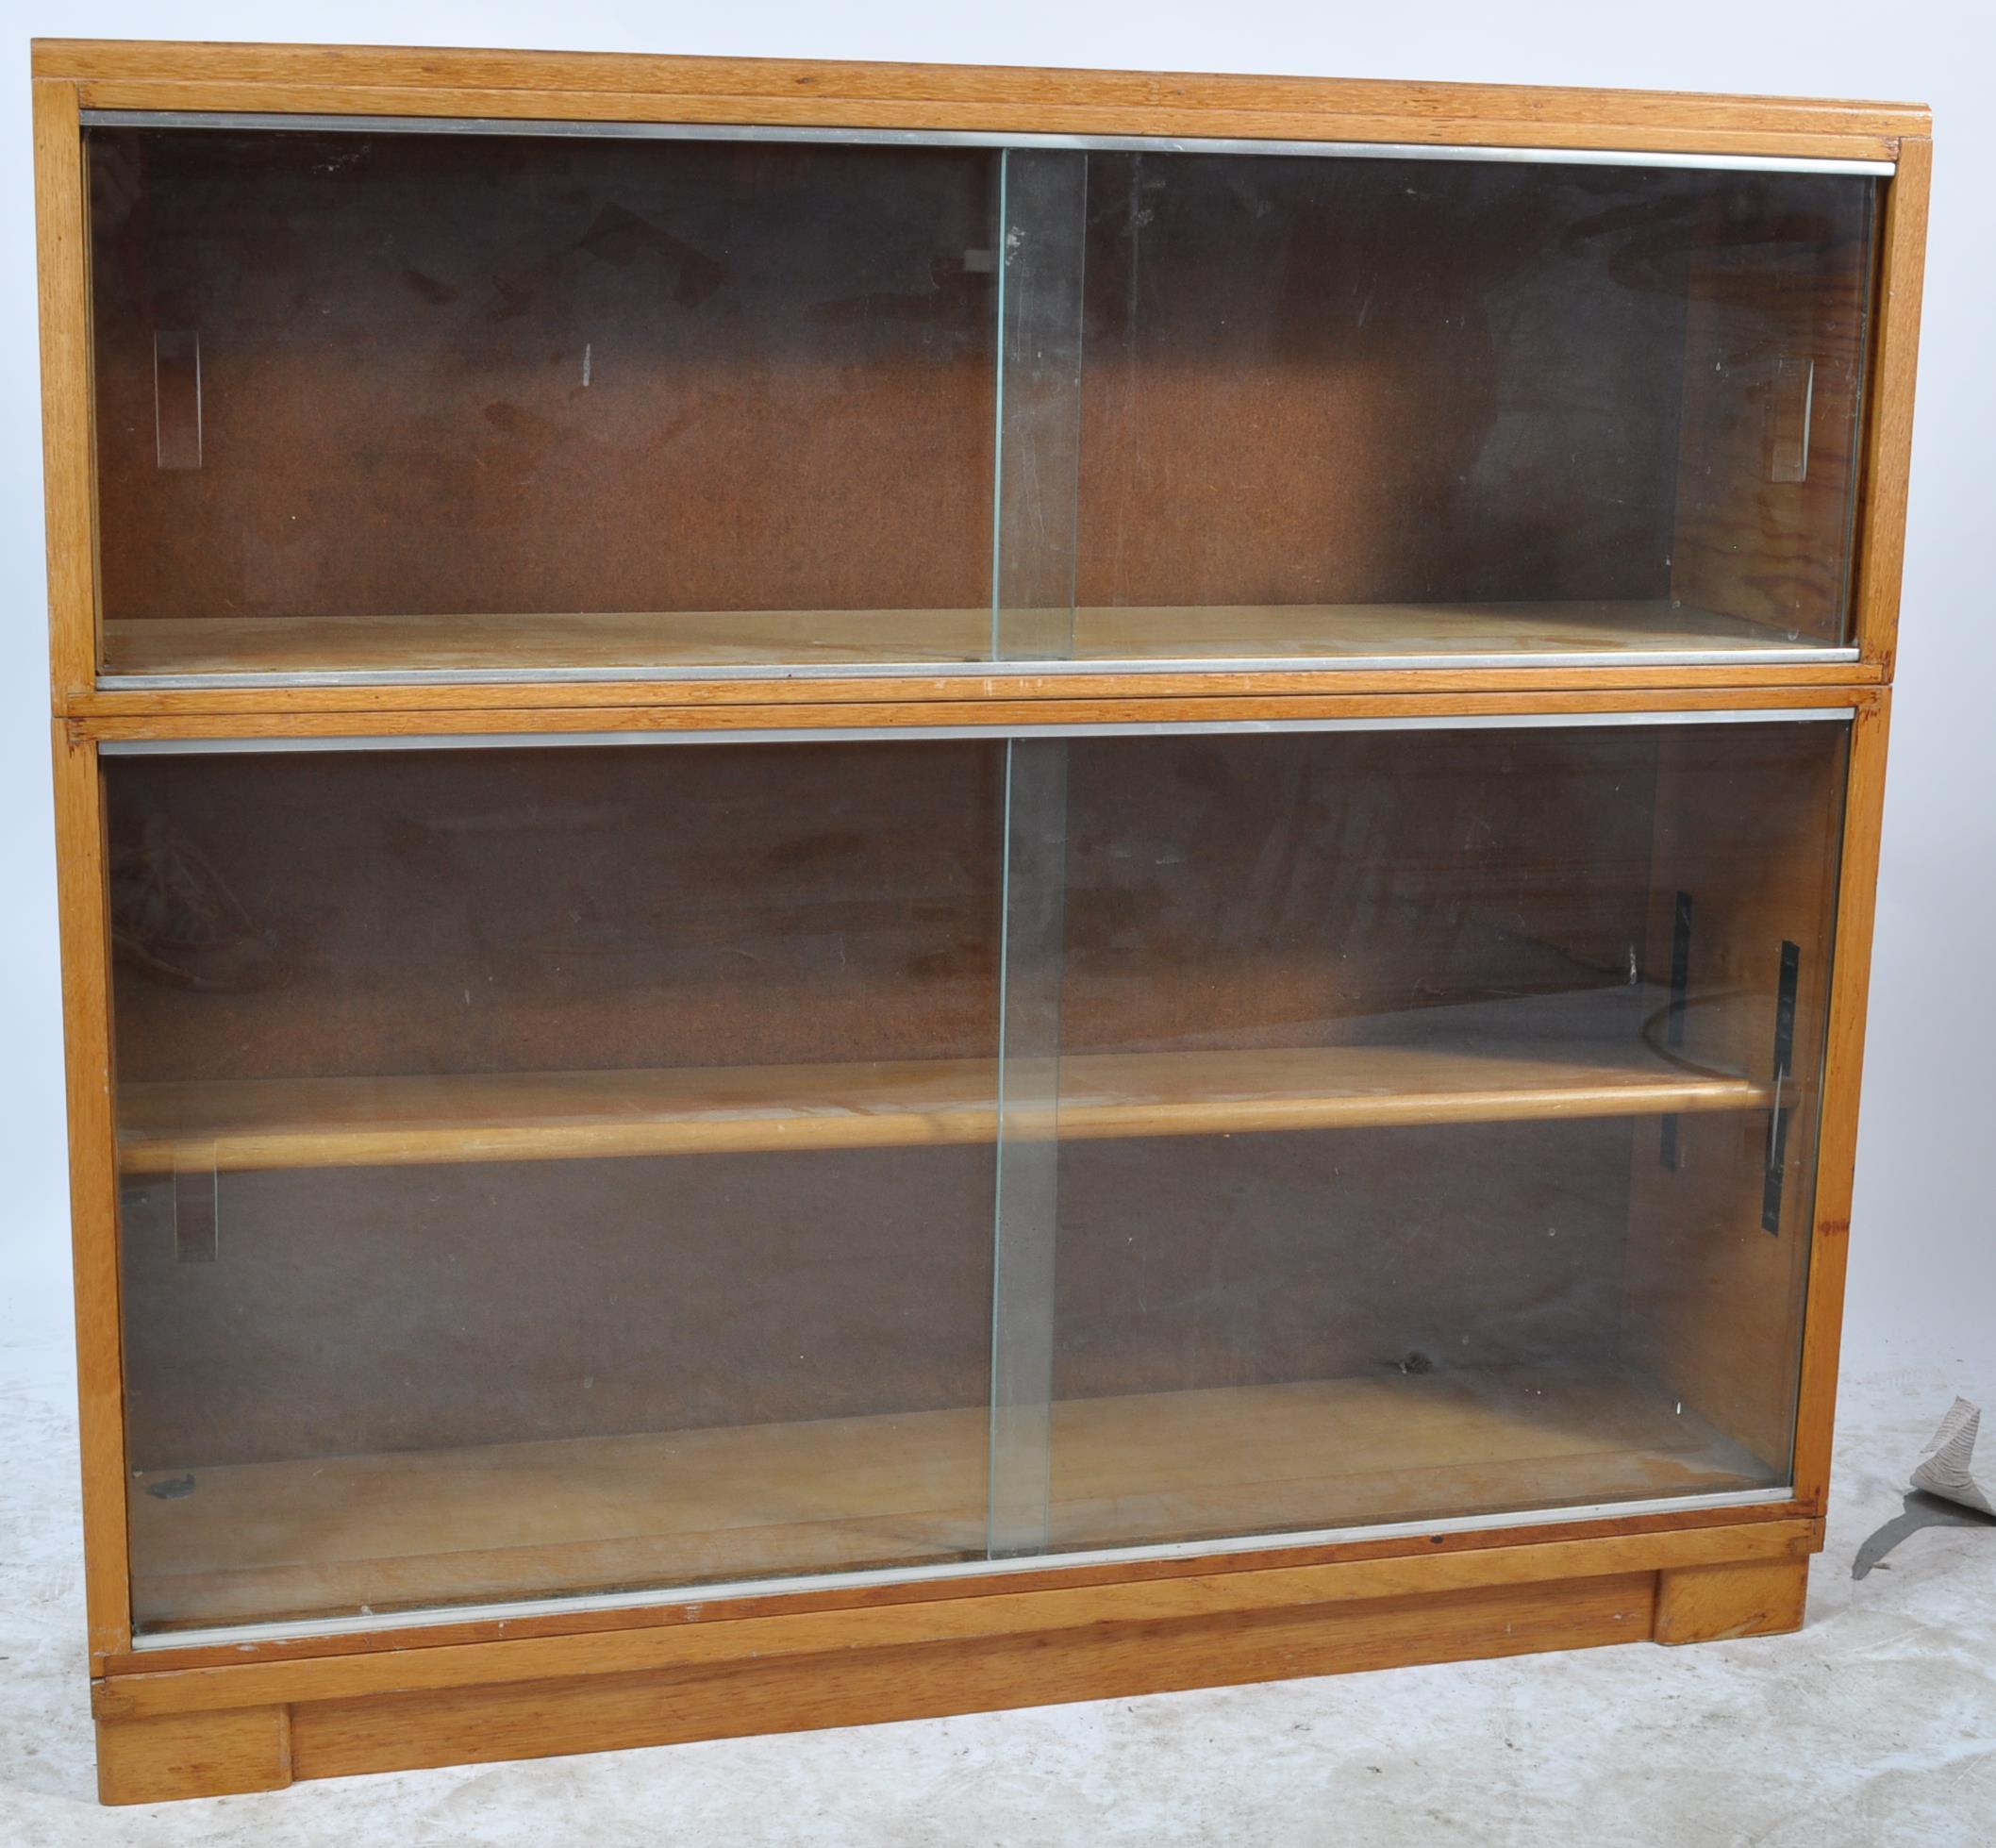 RETRO VINTAGE 1970S 20TH CENTURY MINTY LAWYERS BOOKCASE